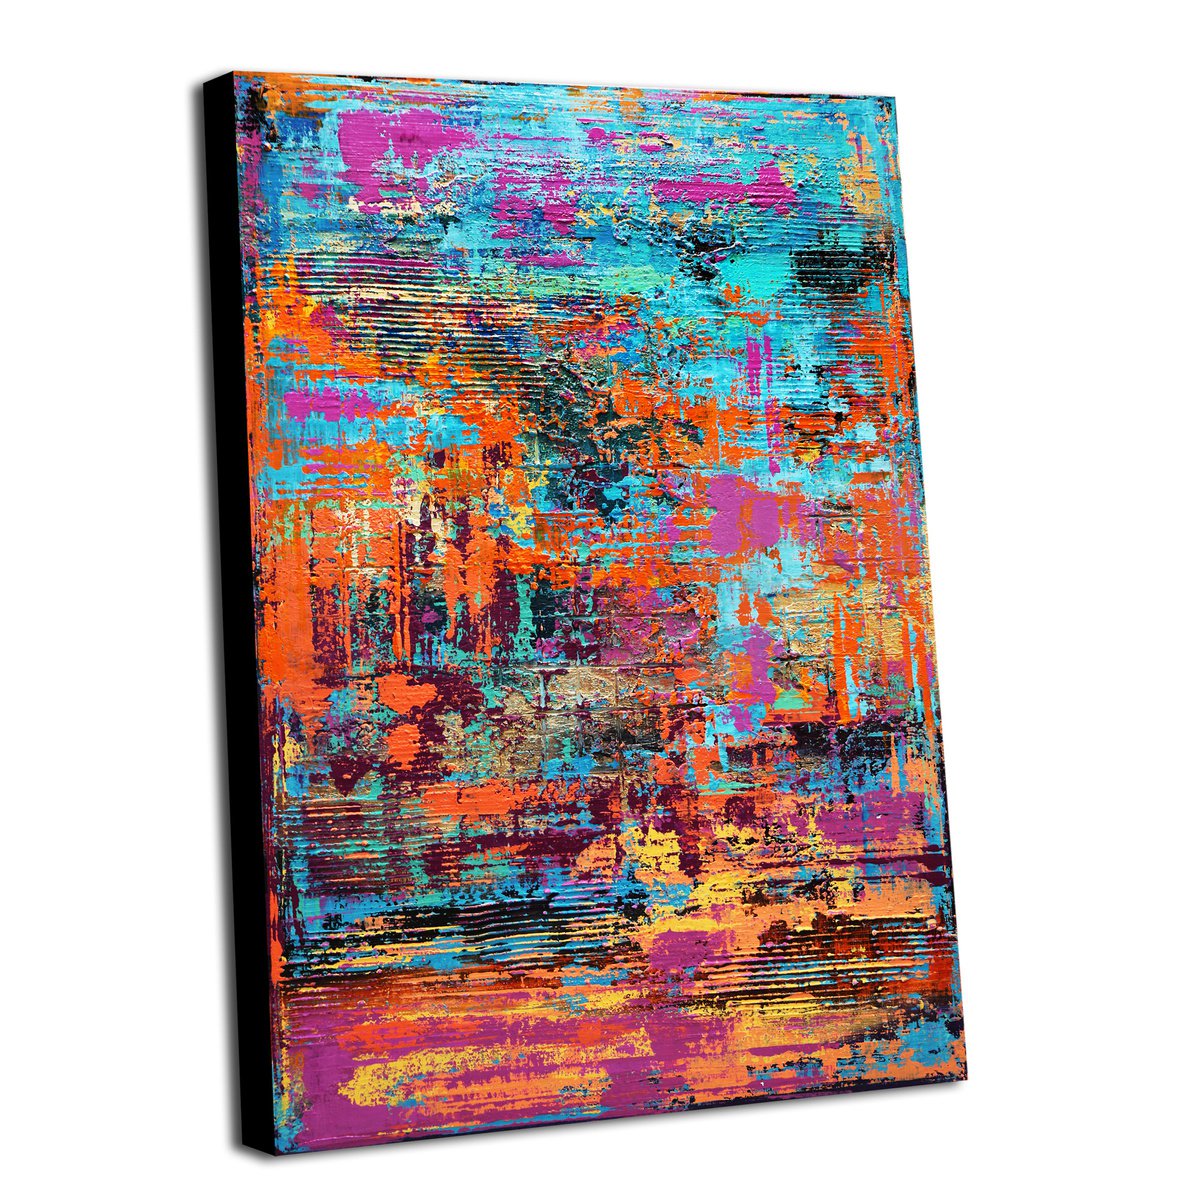 BROKEN RAINBOW - 120 X 80 CMS - ABSTRACT PAINTING TEXTURED * BLUE * ORANGE * GOLD by Inez Froehlich